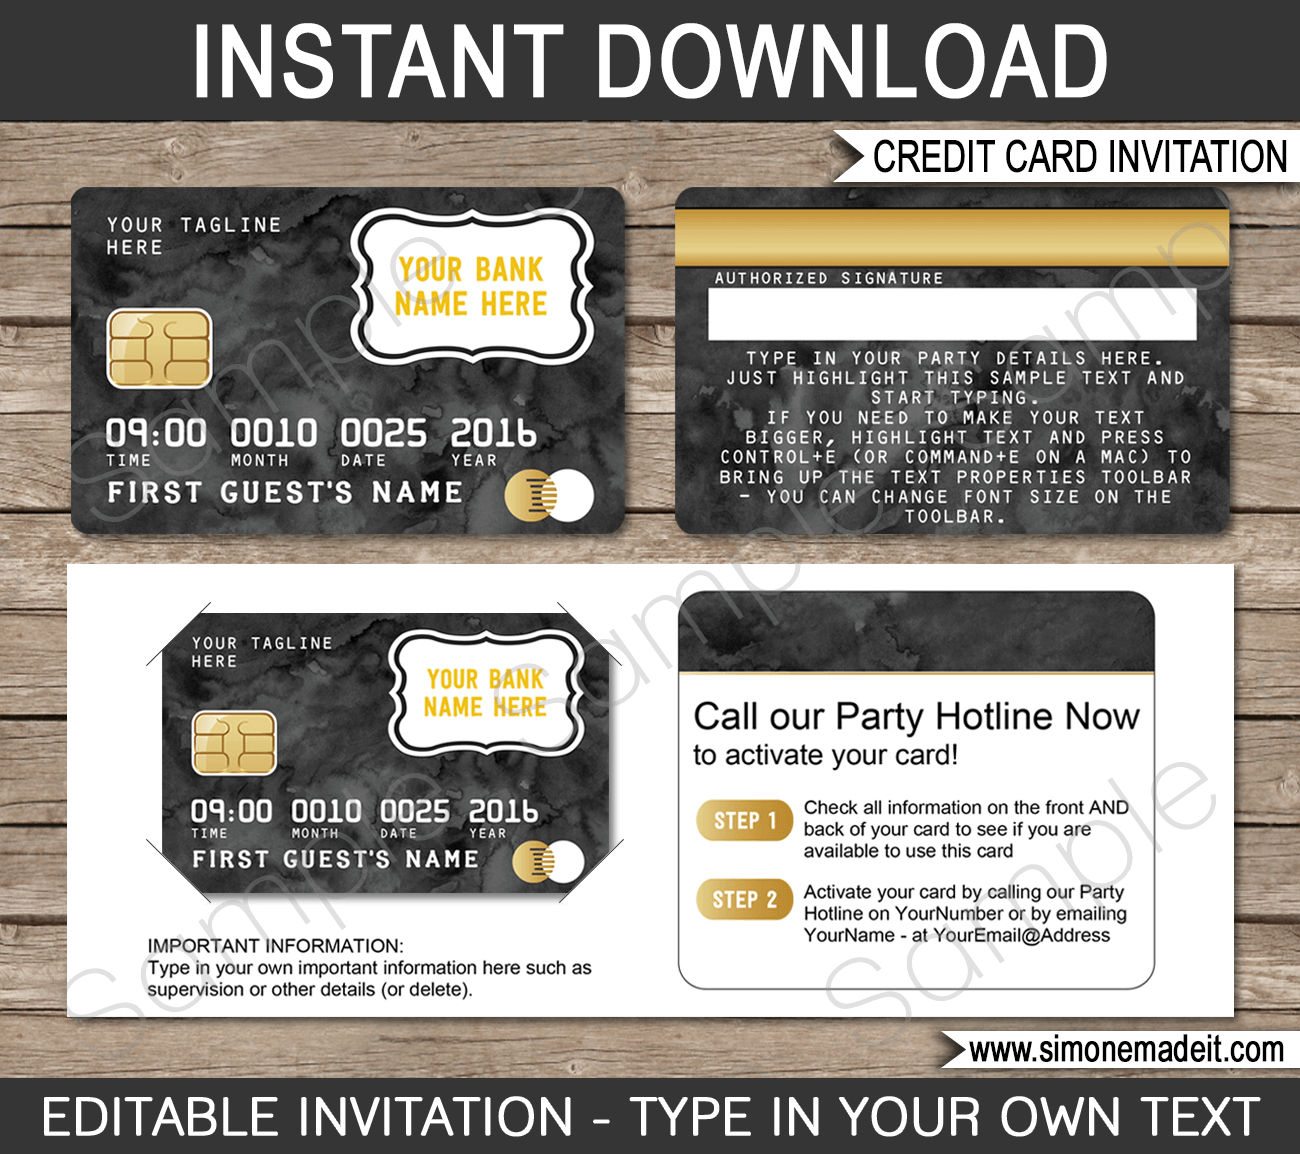 Credit Card Invitation | Mall Scavenger Hunt Invitations With Credit Card Template For Kids